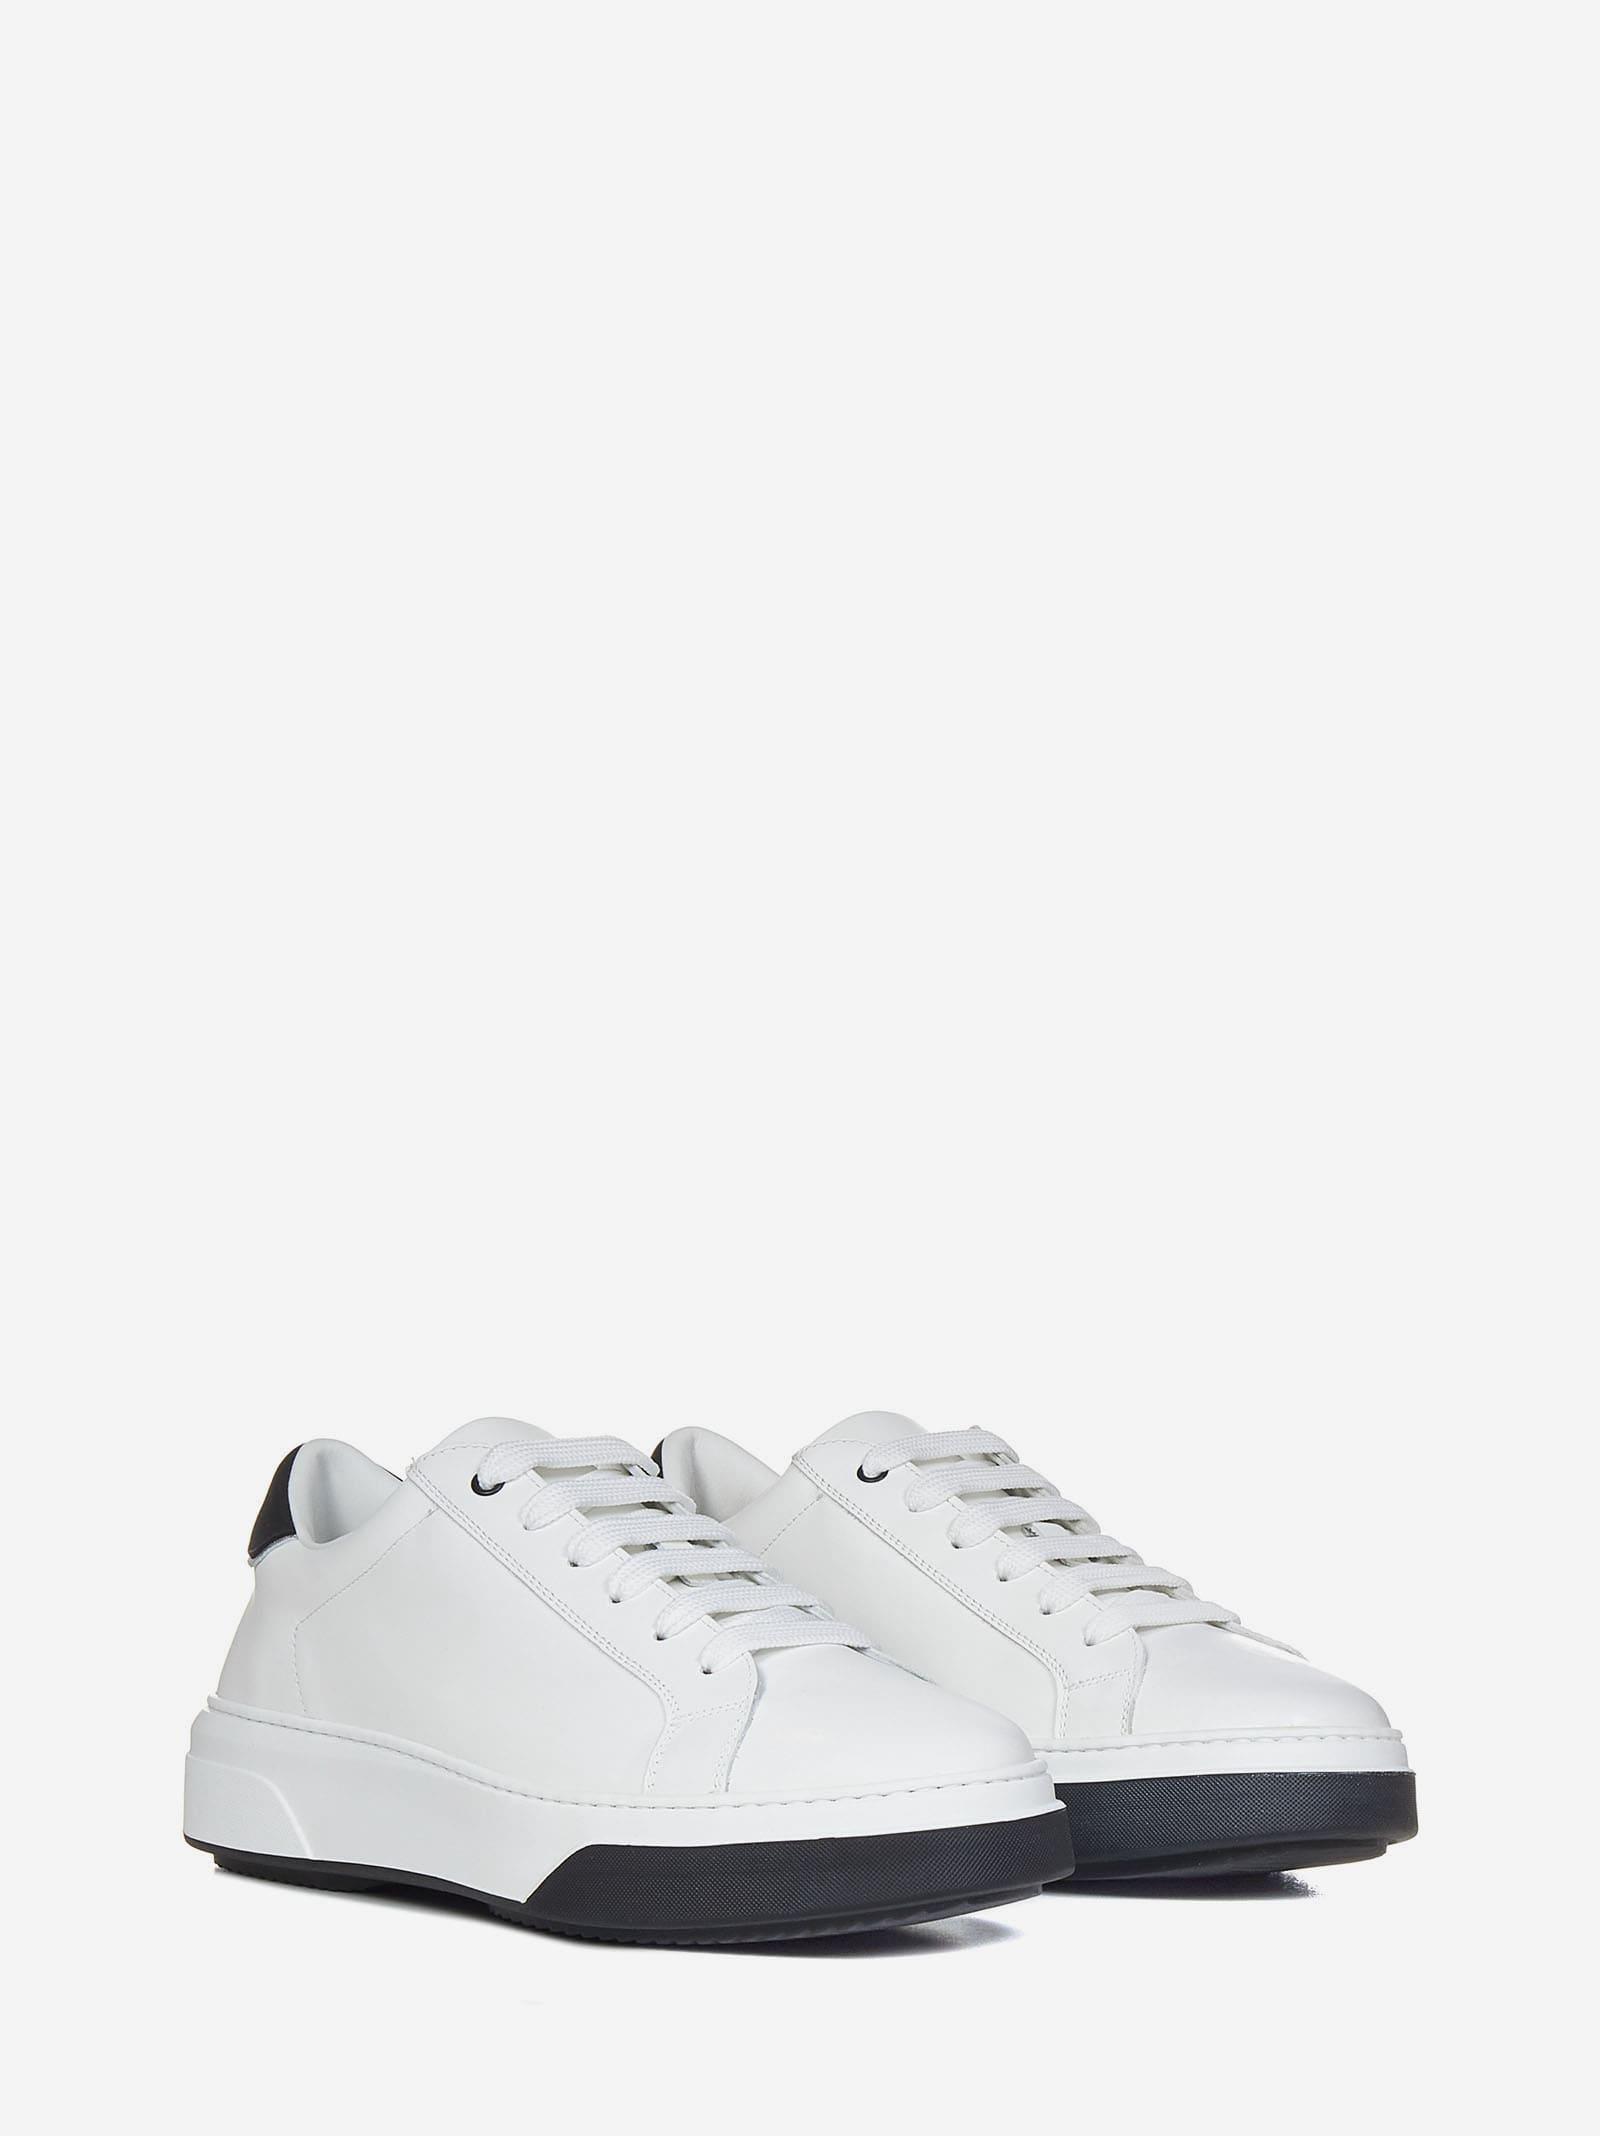 DSquared² Bumper Sneakers in White for Men | Lyst